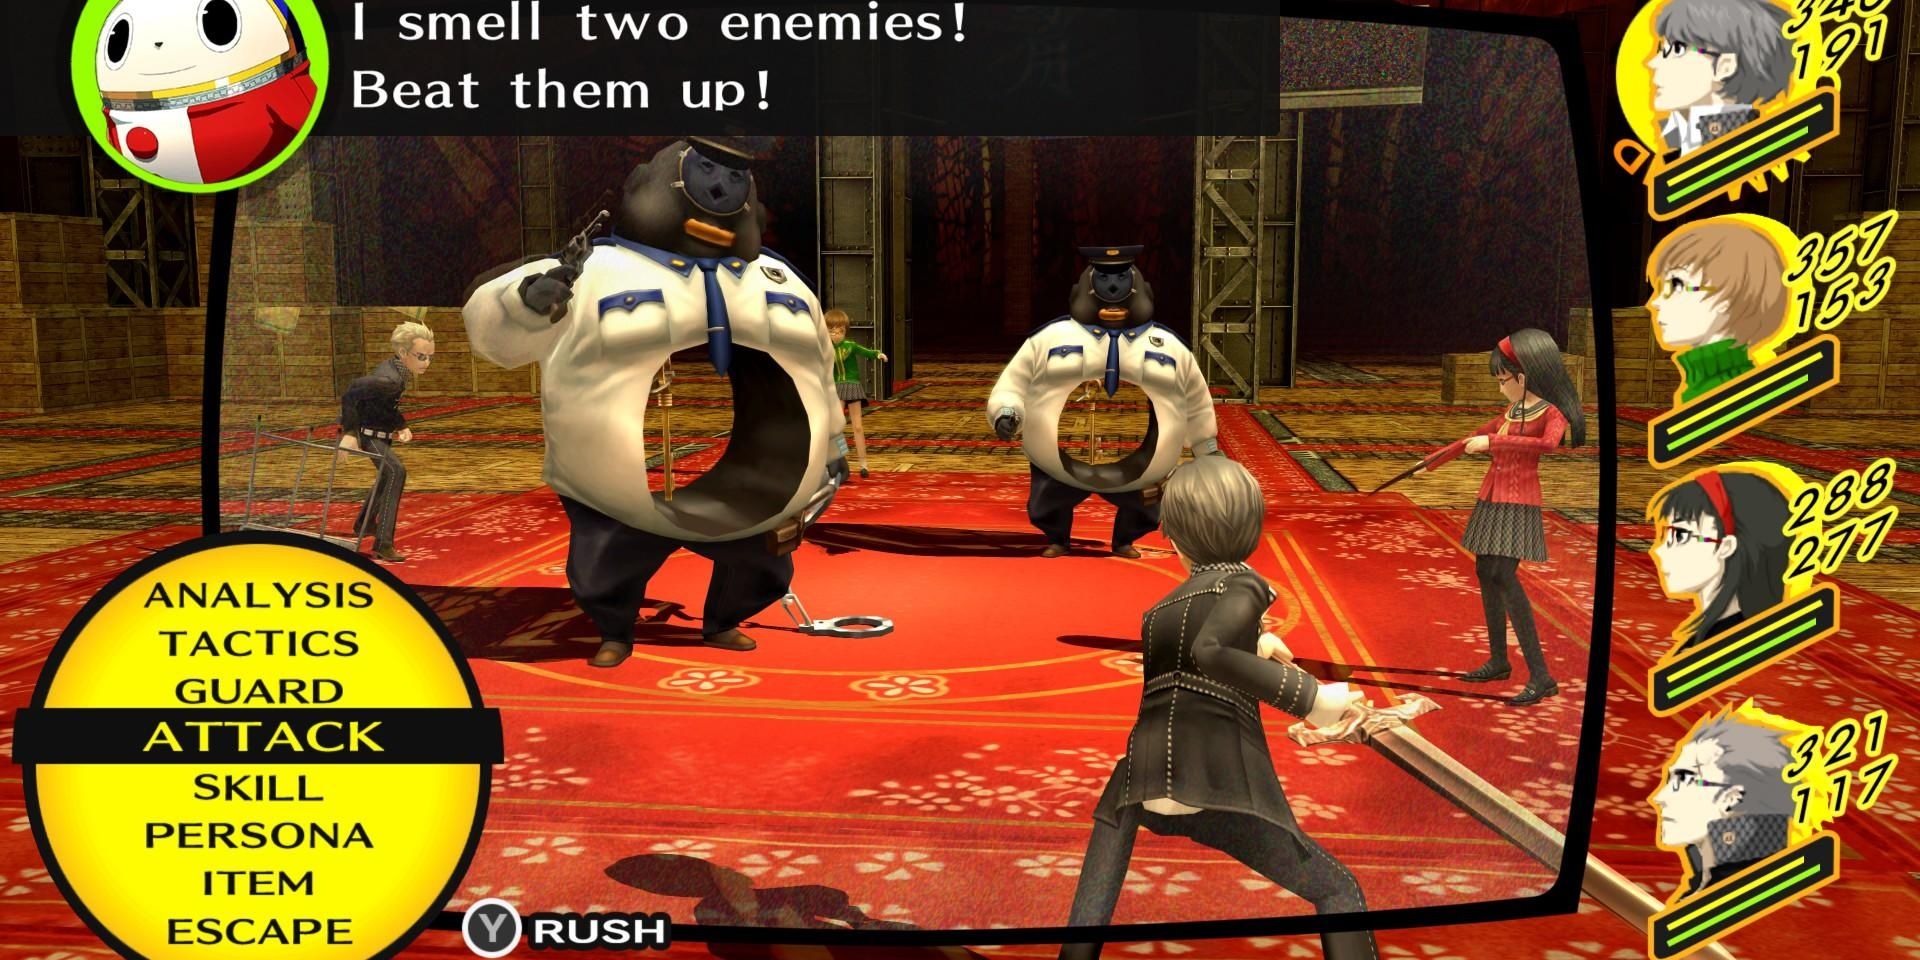 A fight in Persona 4 Golden